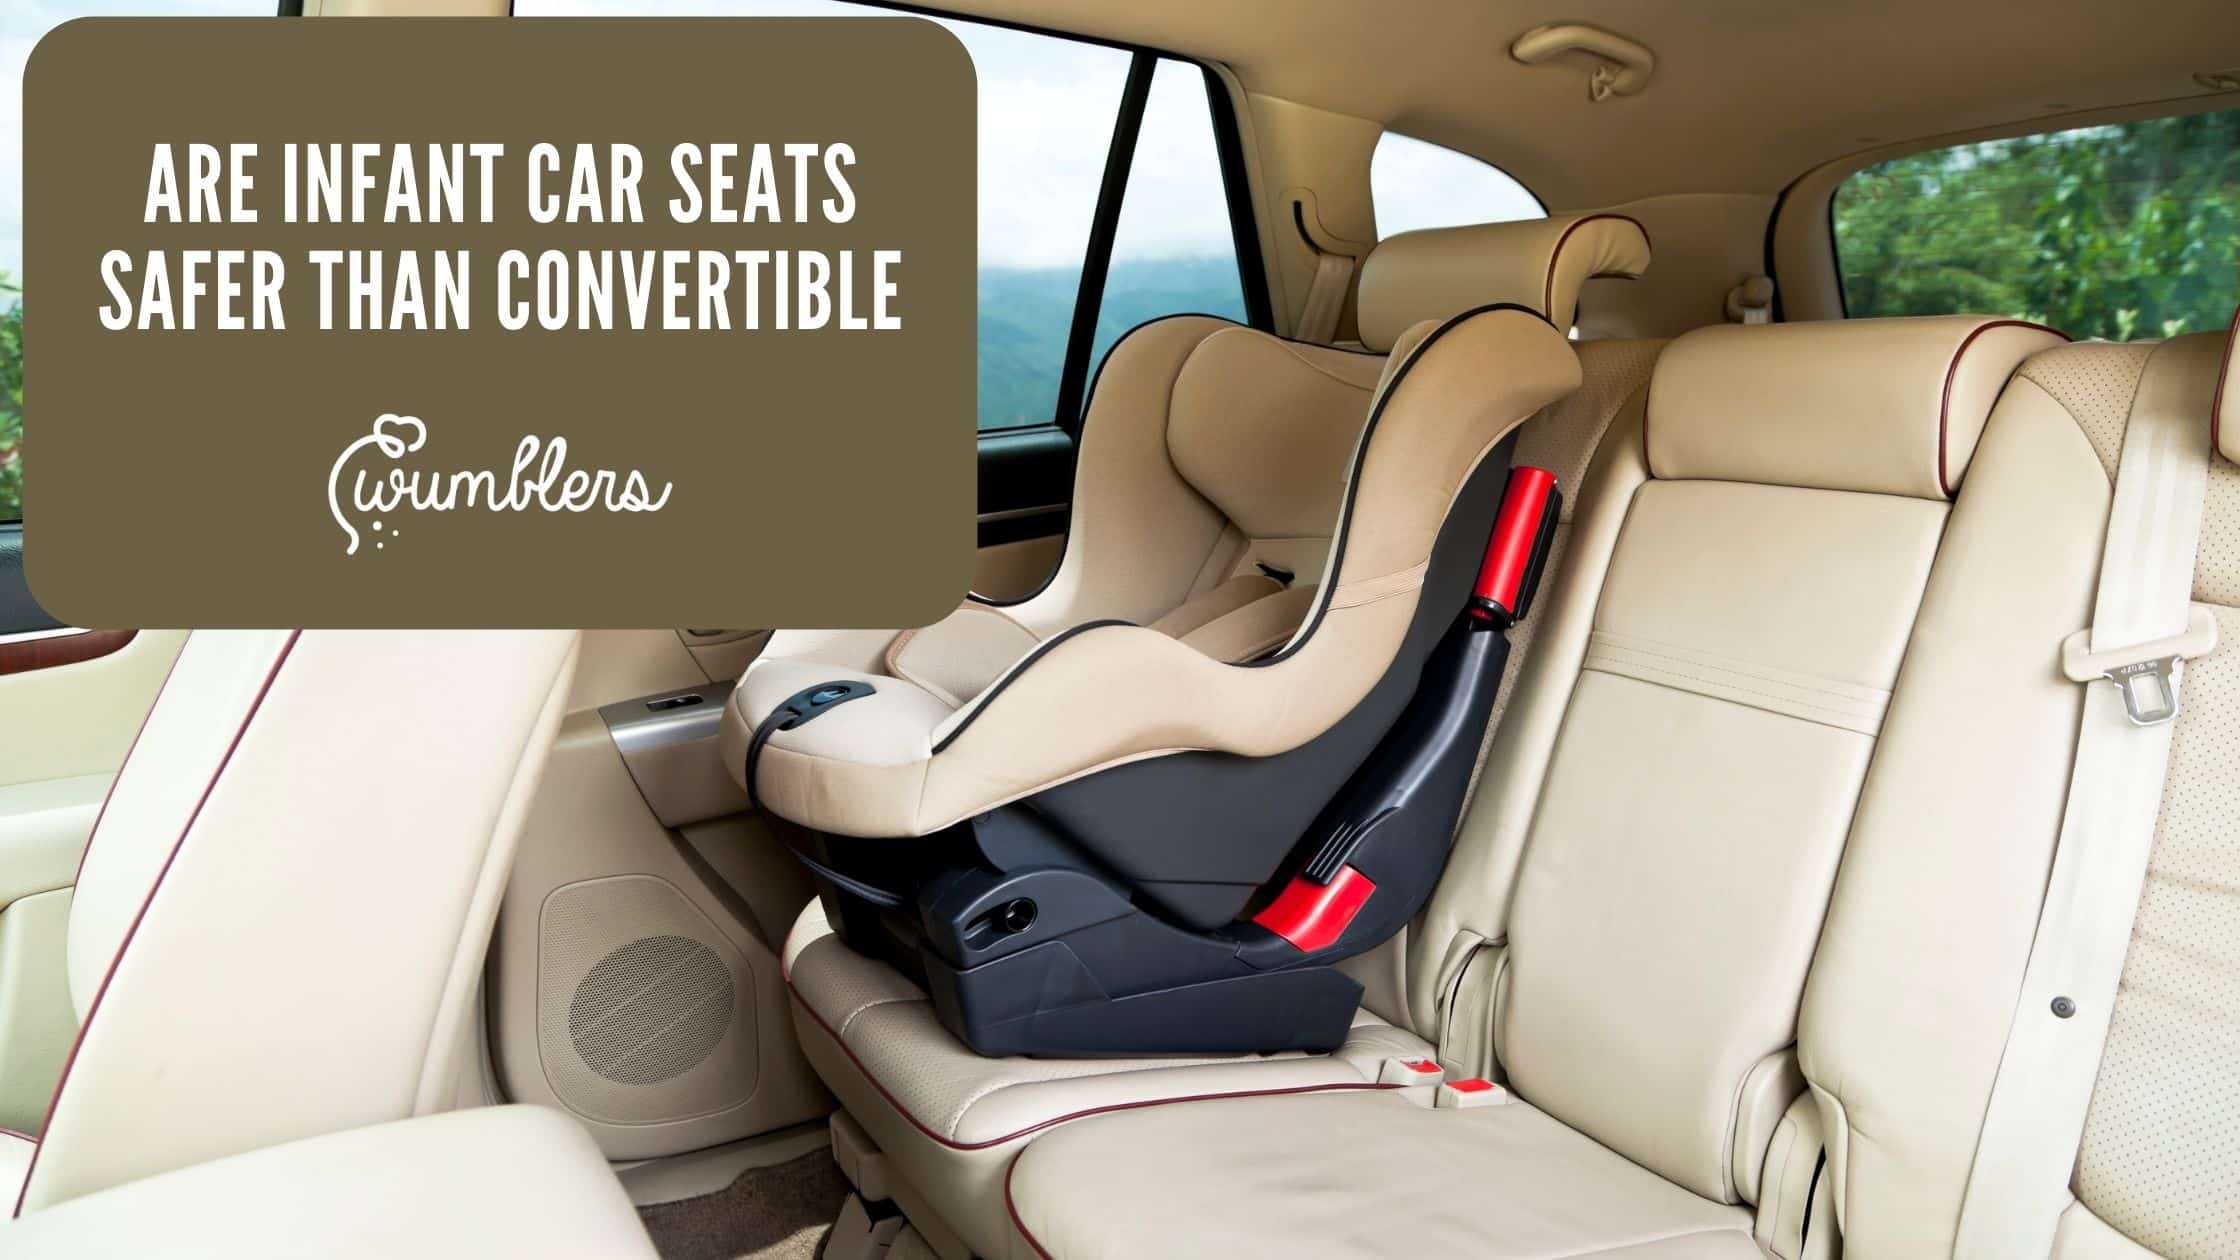 Are Infant Car Seats Safer Than Convertible